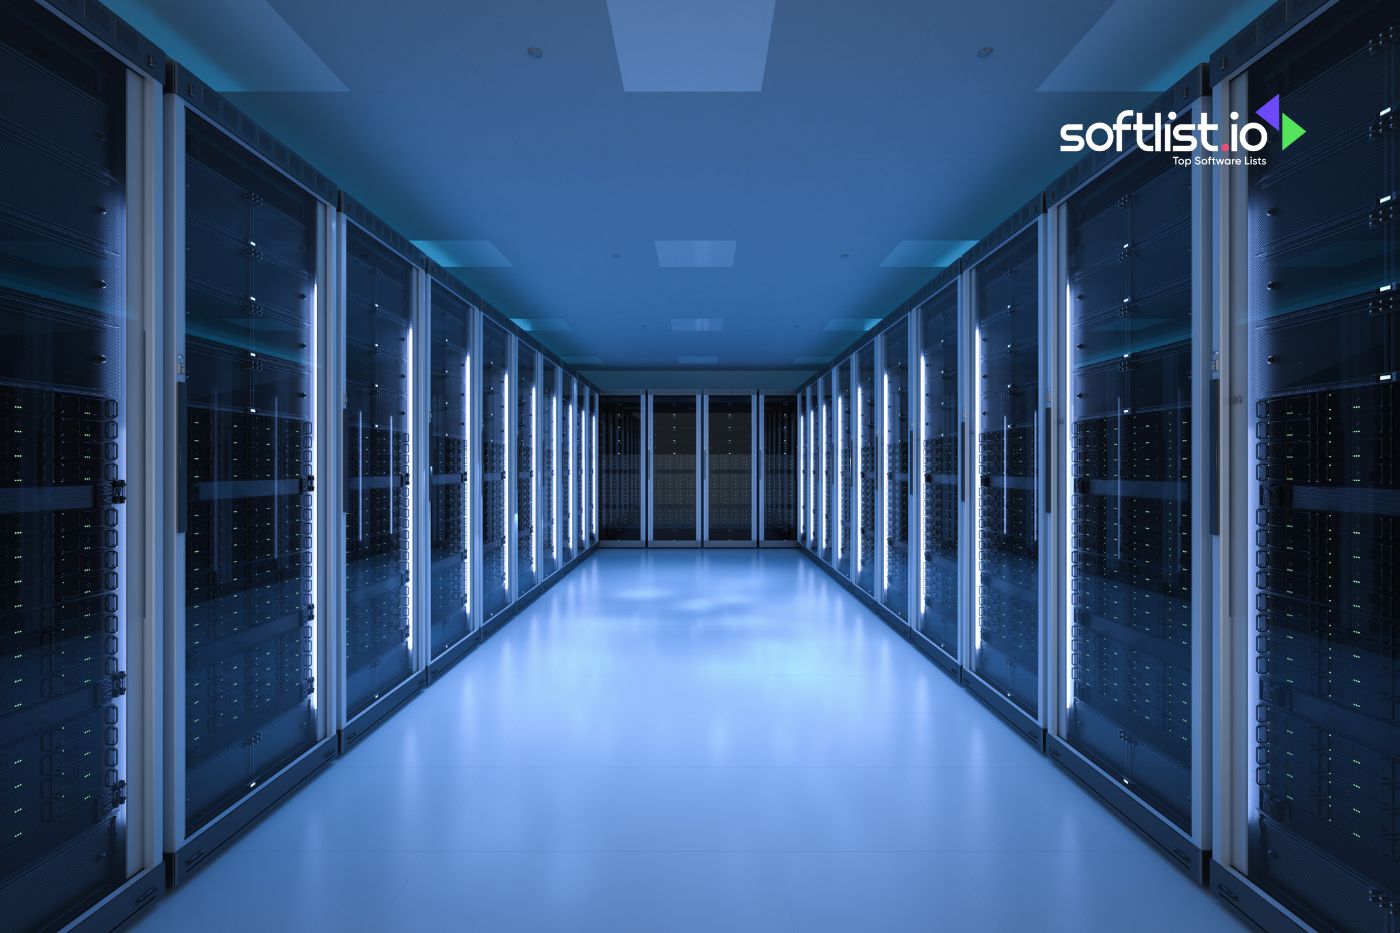 Long hallway of a blue-lit data center with rows of server racks